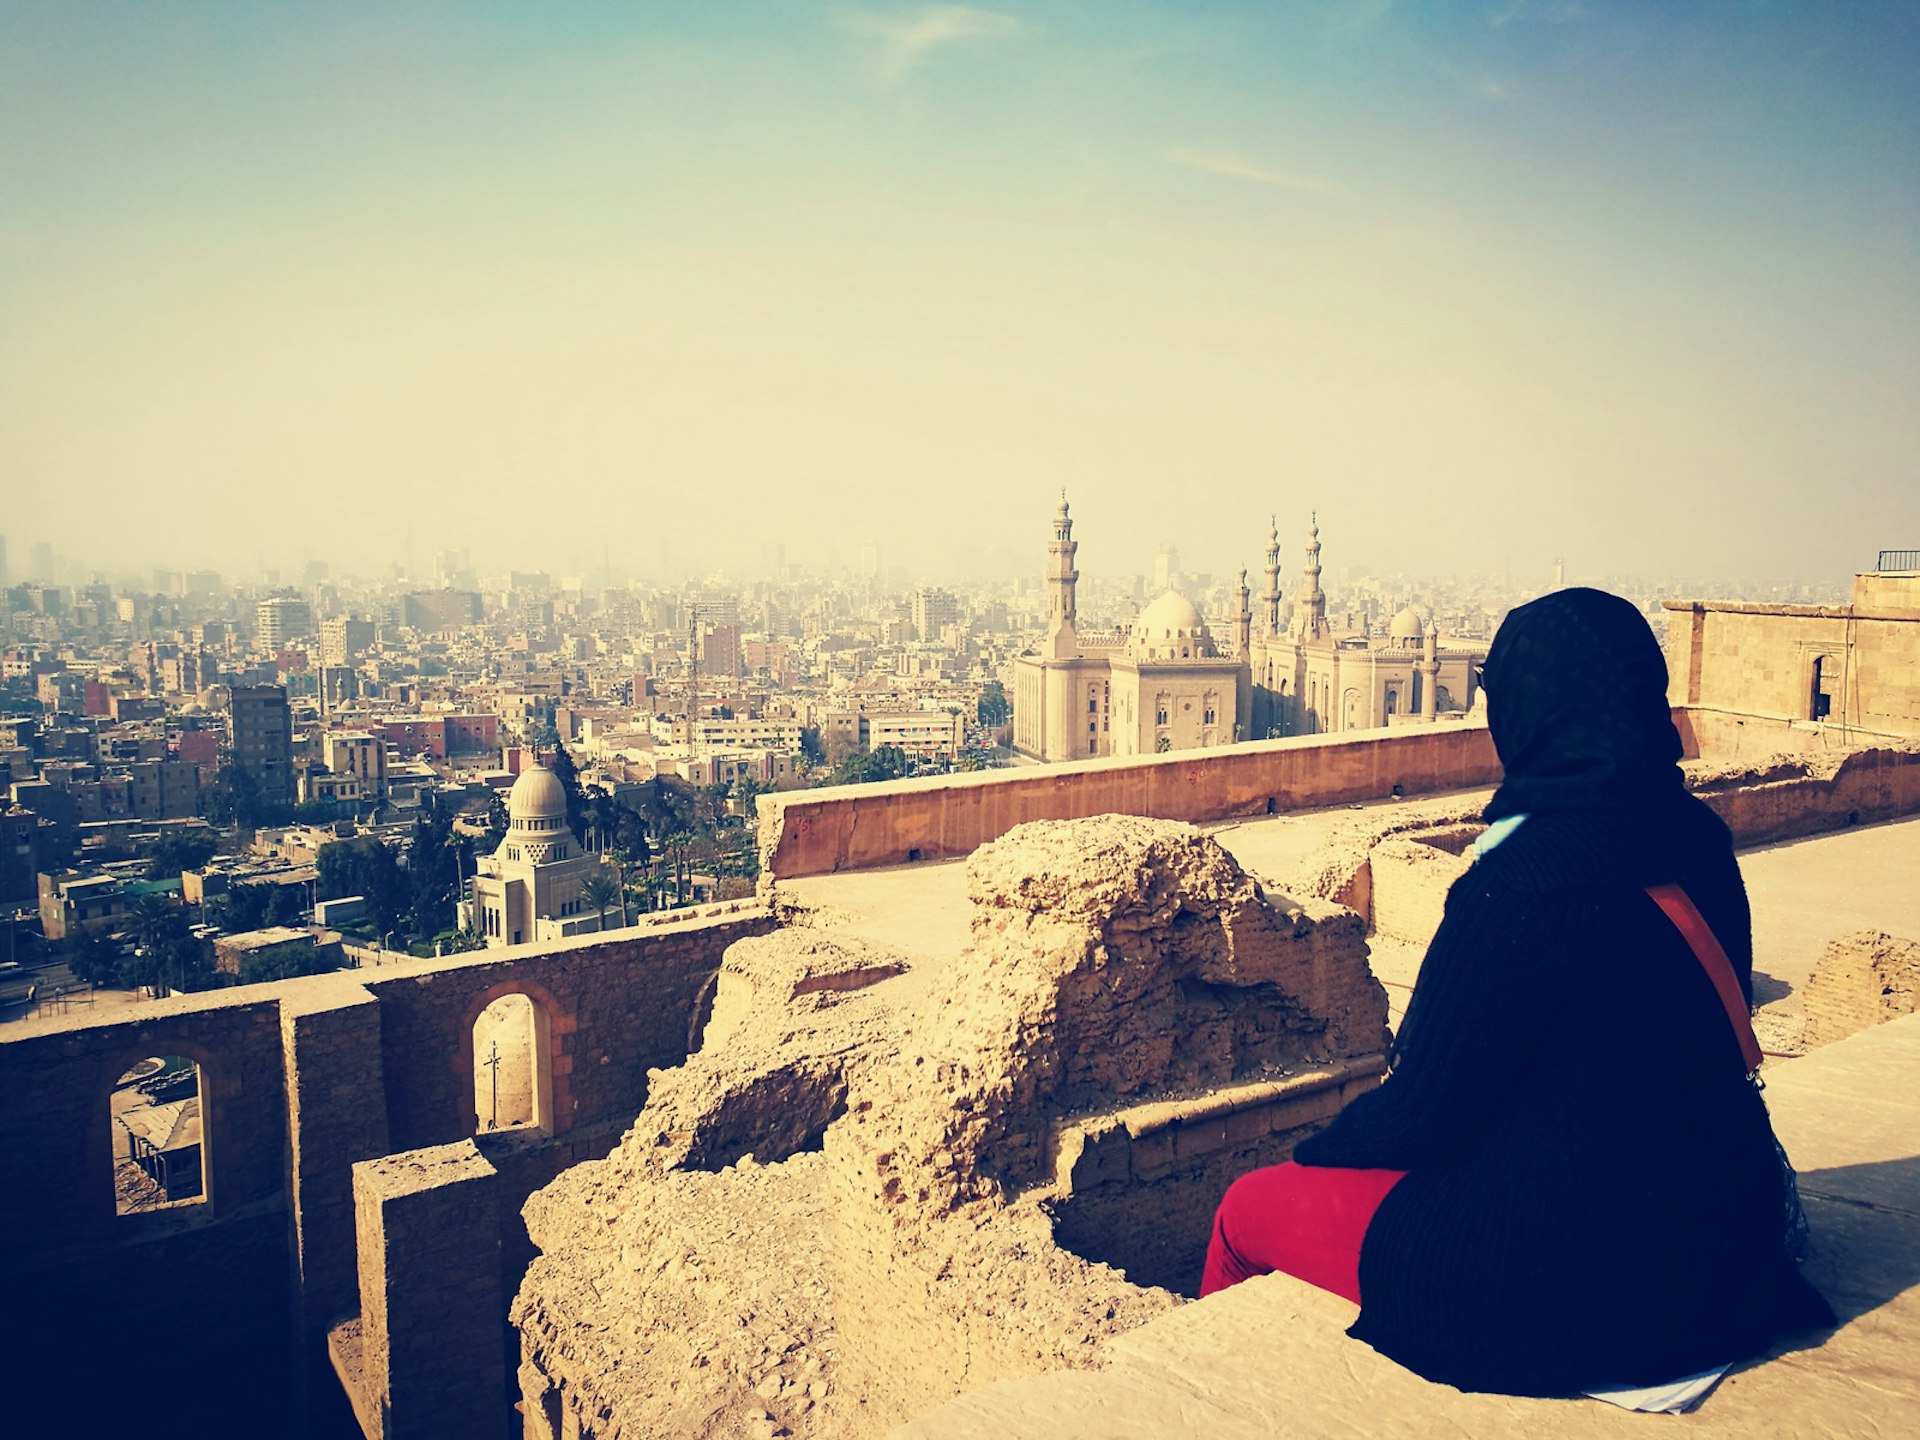 A woman in hijab sits over looking the city of Cairo, Egypt. Image by Ahmed Mandoub / EyeEm / Getty Images